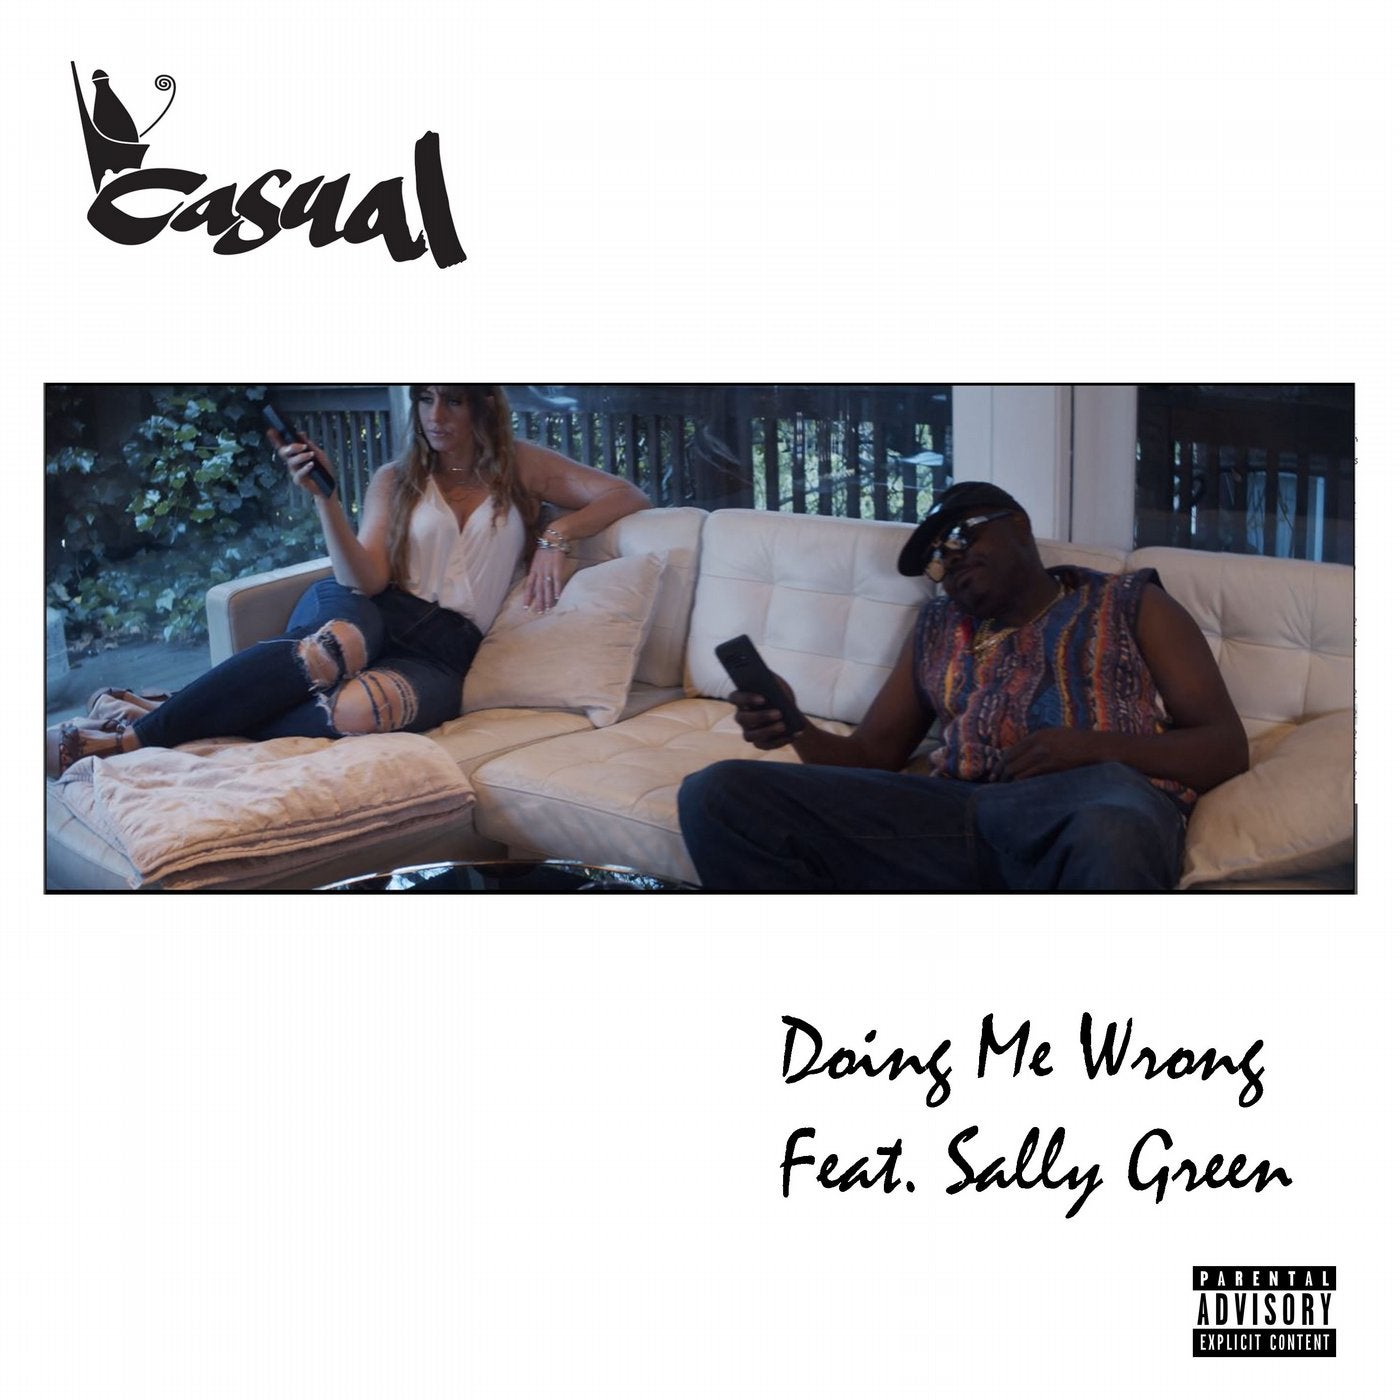 Doing Me Wrong (feat. Sally Green)